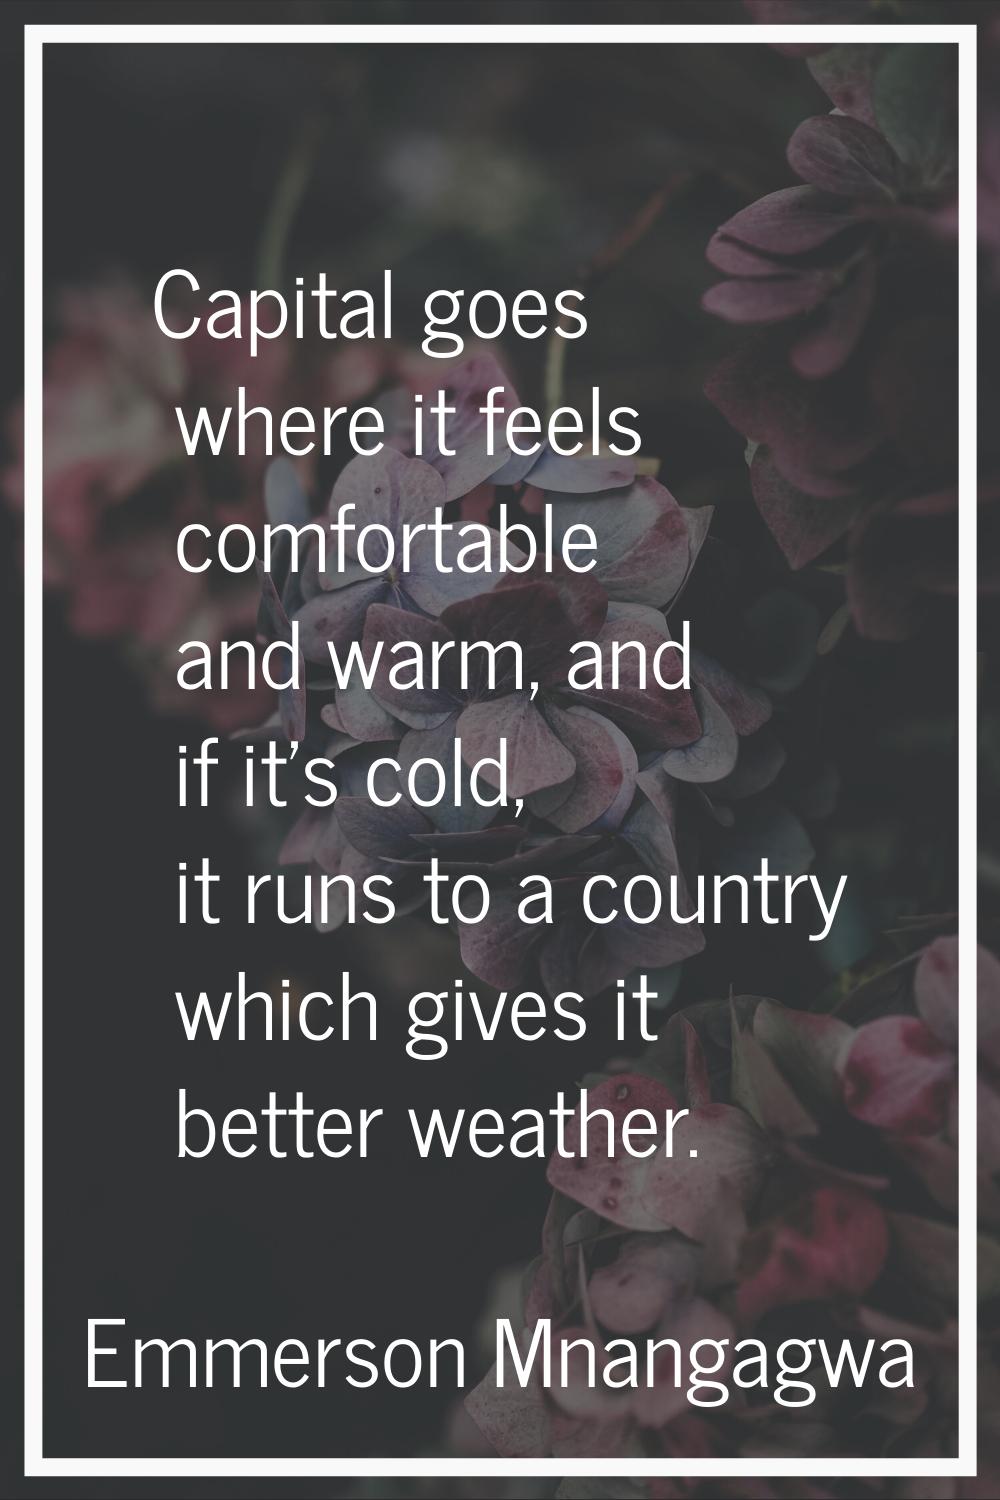 Capital goes where it feels comfortable and warm, and if it's cold, it runs to a country which give